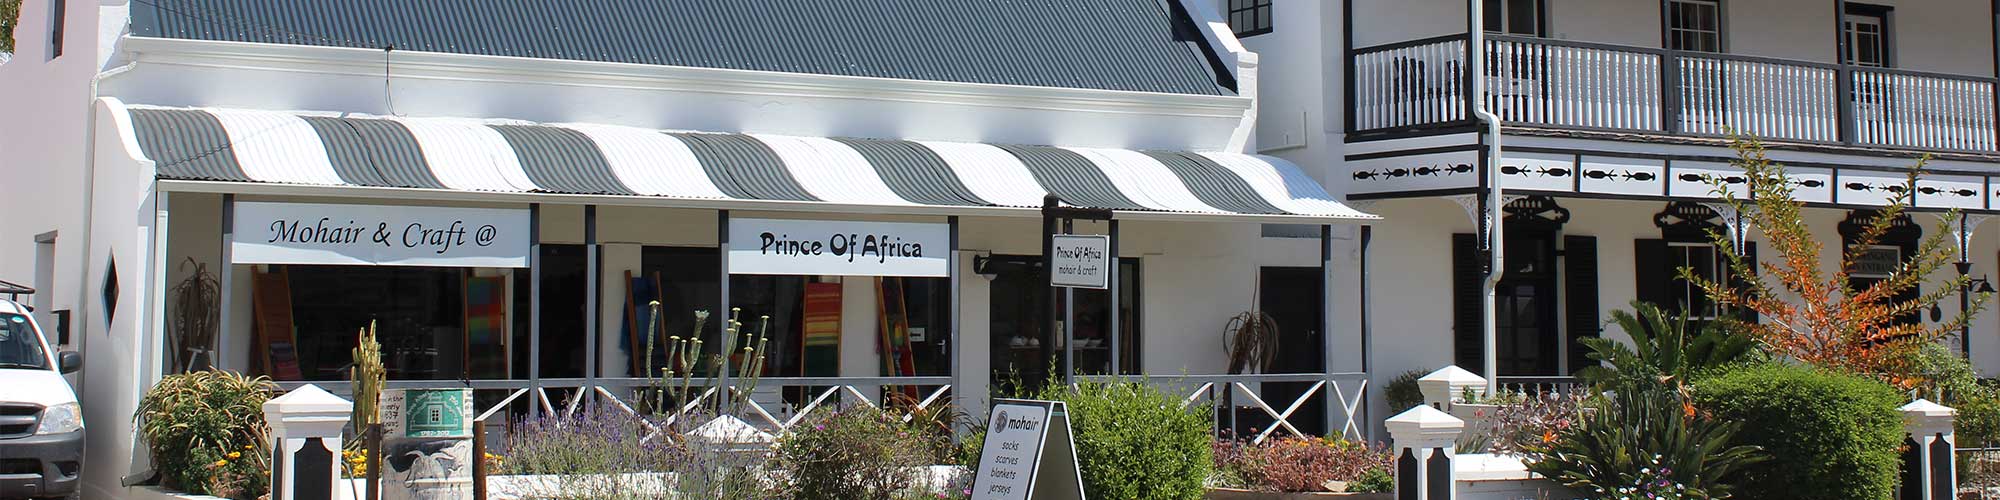 prince of africa 4